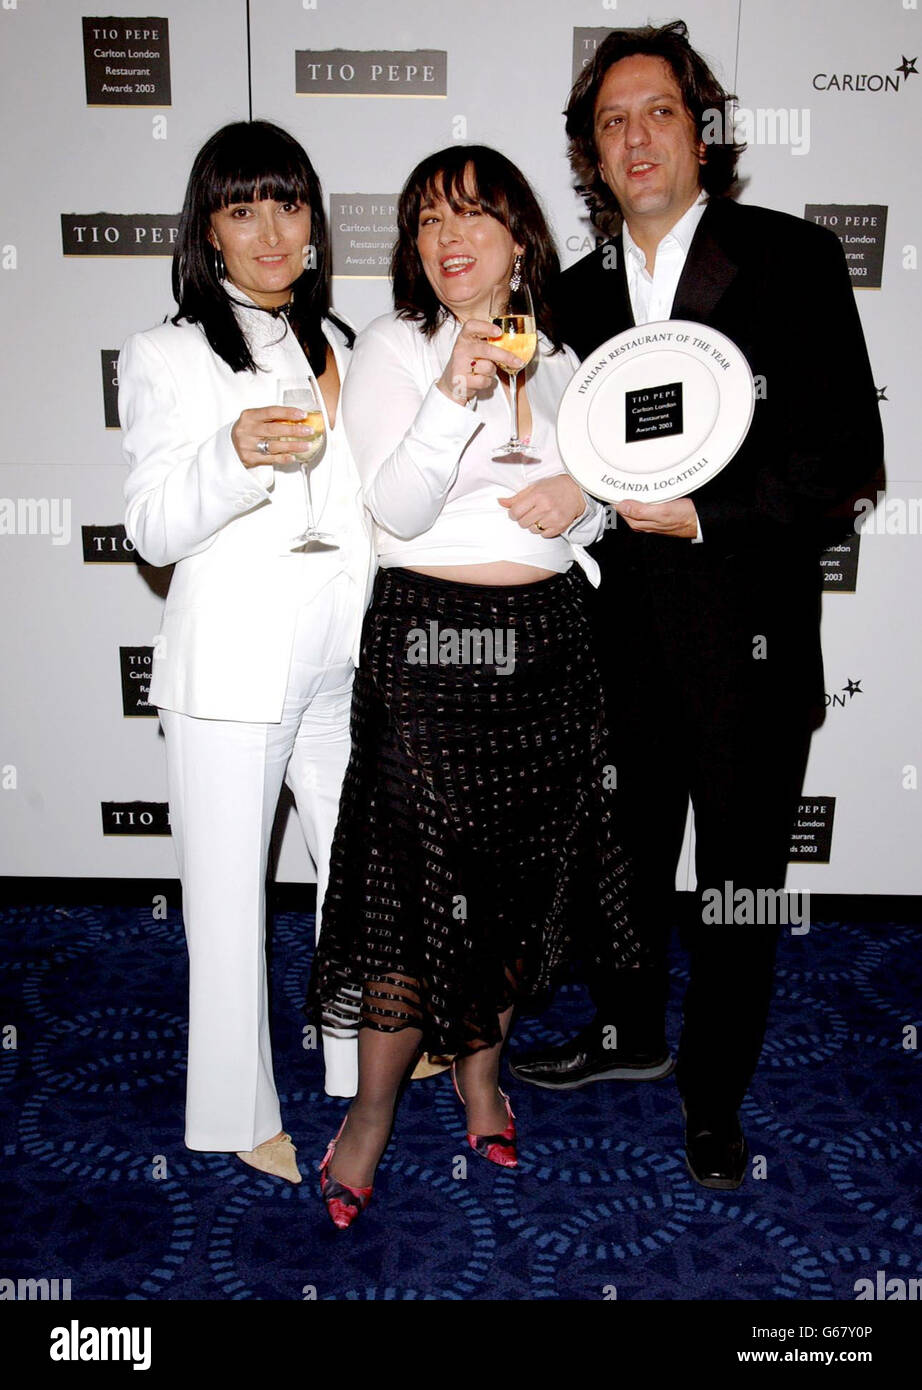 Arabella Weir presents Chef Giorgio Locatelli and wife Plaxy from Locanda Locatelli with their Italian Restaurant Of The Year Award during the Tio Pepe/Carlton London Restaurant Awards 2003 at Le Meridien Grosvenor House, Park Lane in London. Stock Photo